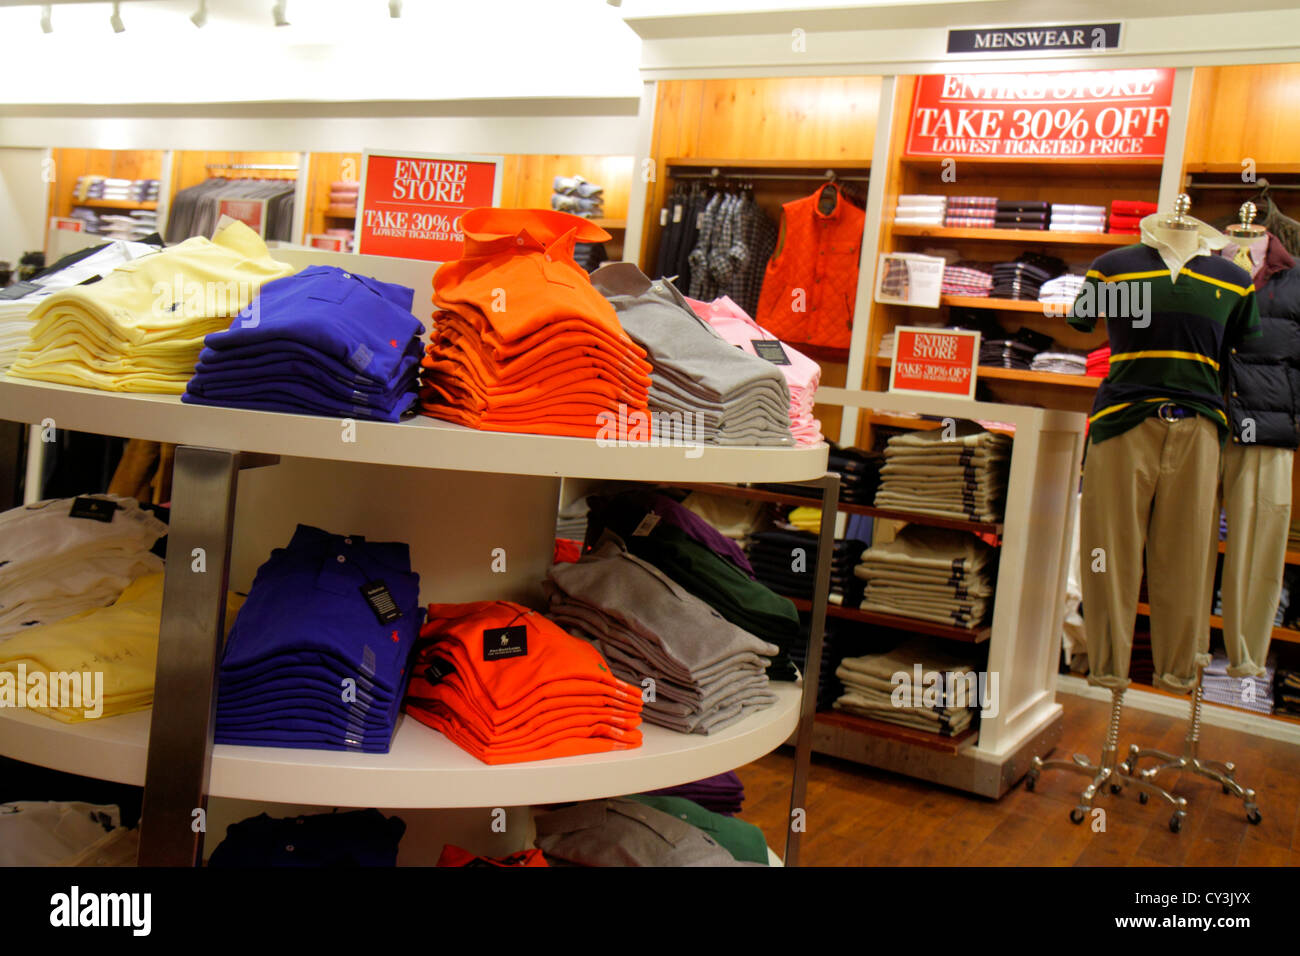 Buy polo ralph lauren outlet - 65% OFF!